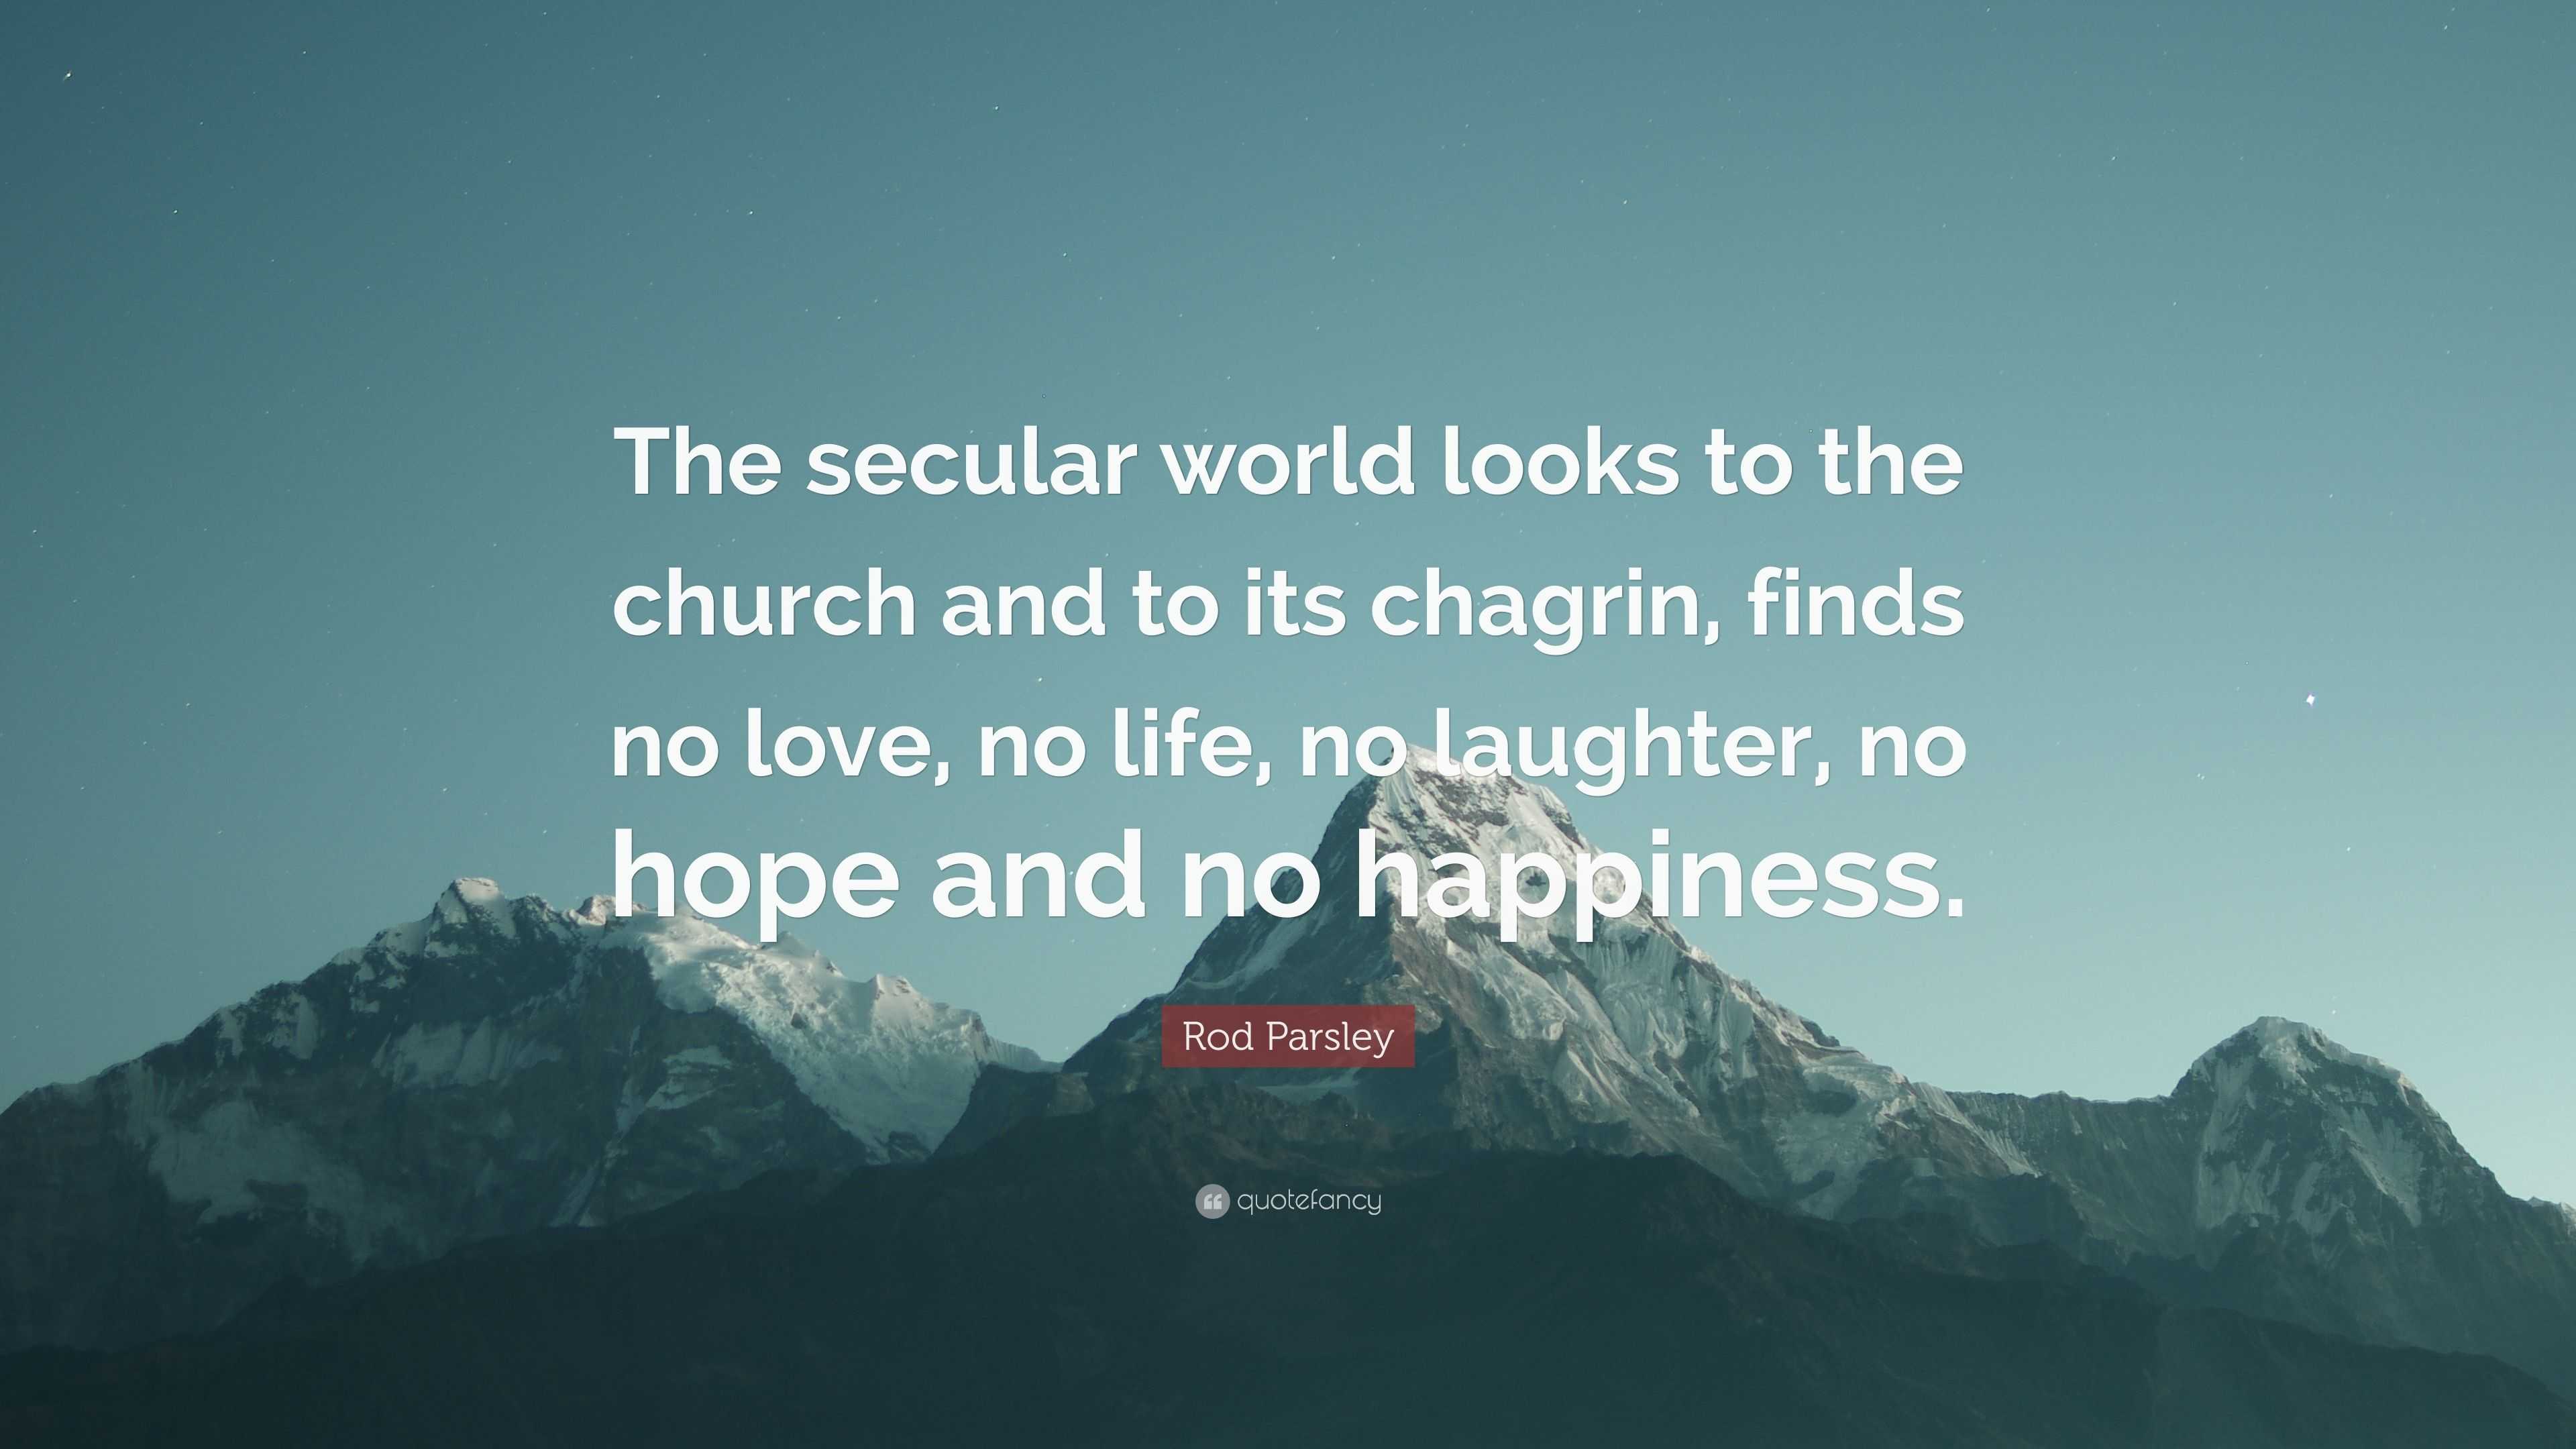 Rod Parsley Quote “The secular world looks to the church and to its chagrin